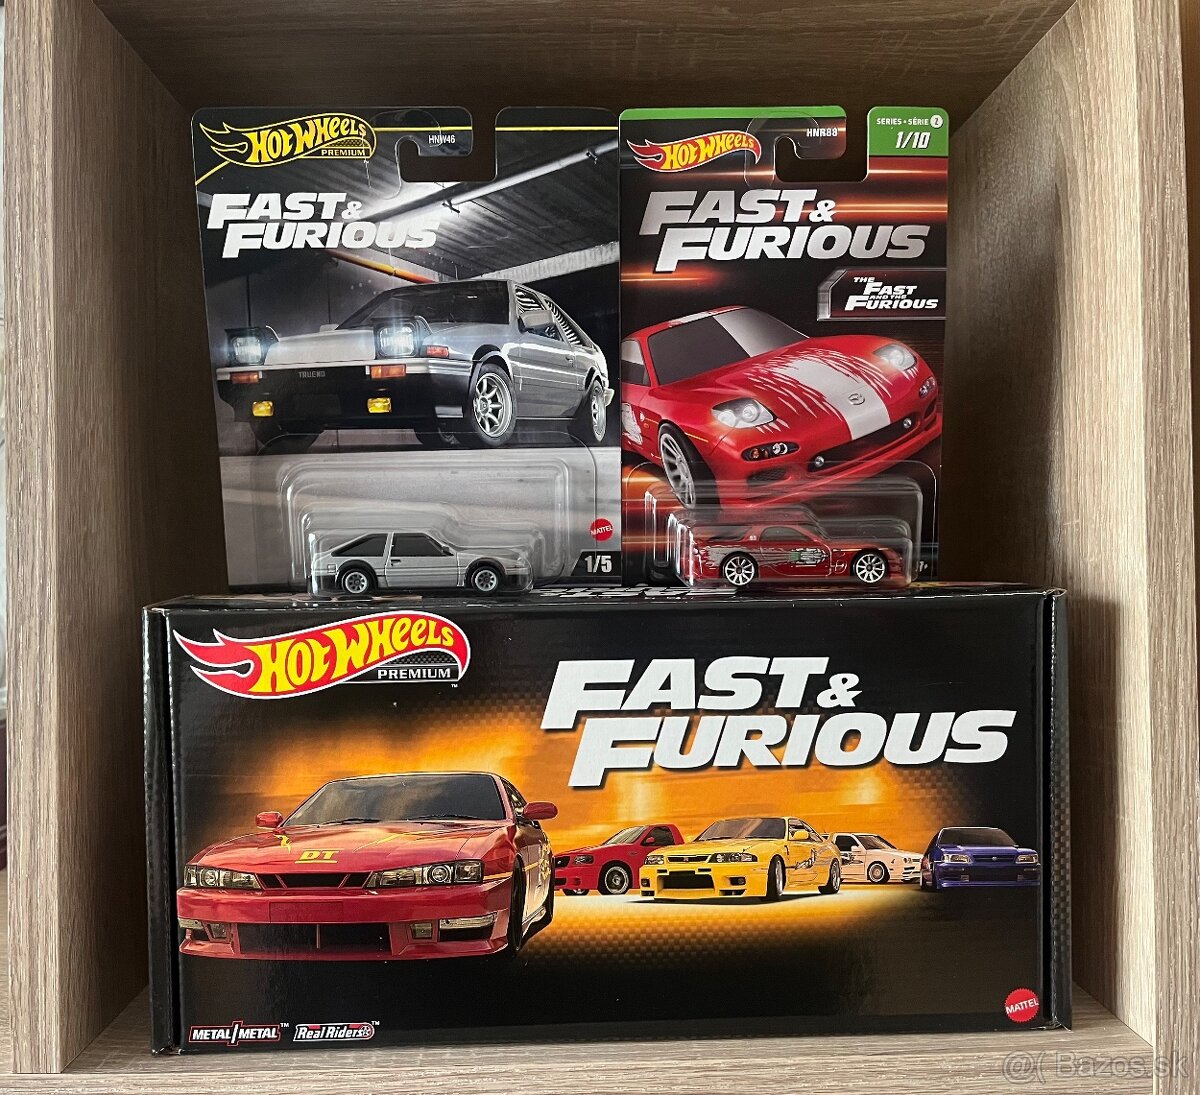 Fast and furious Hot wheels set 1:64